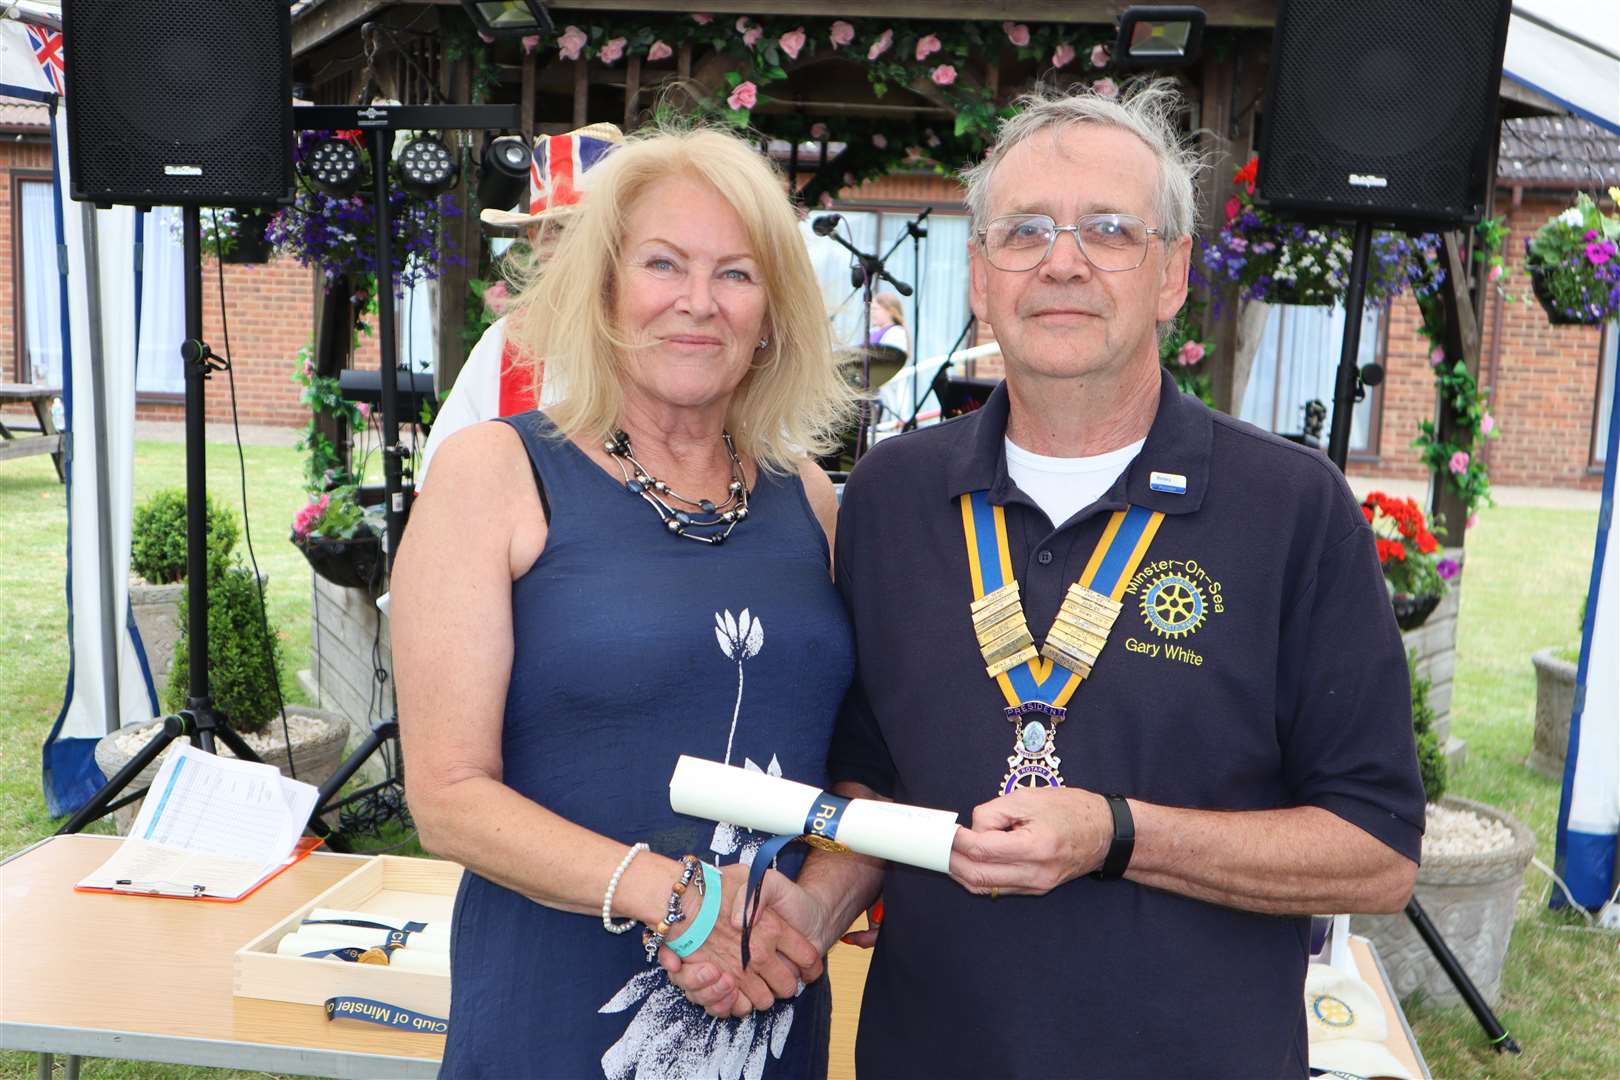 Julie Nicholls of Sheppey FM with president Gary White at Minster-on-Sea Rotary Club's Platinum Jubilee volunteer awards at the Abbey Hotel on Friday